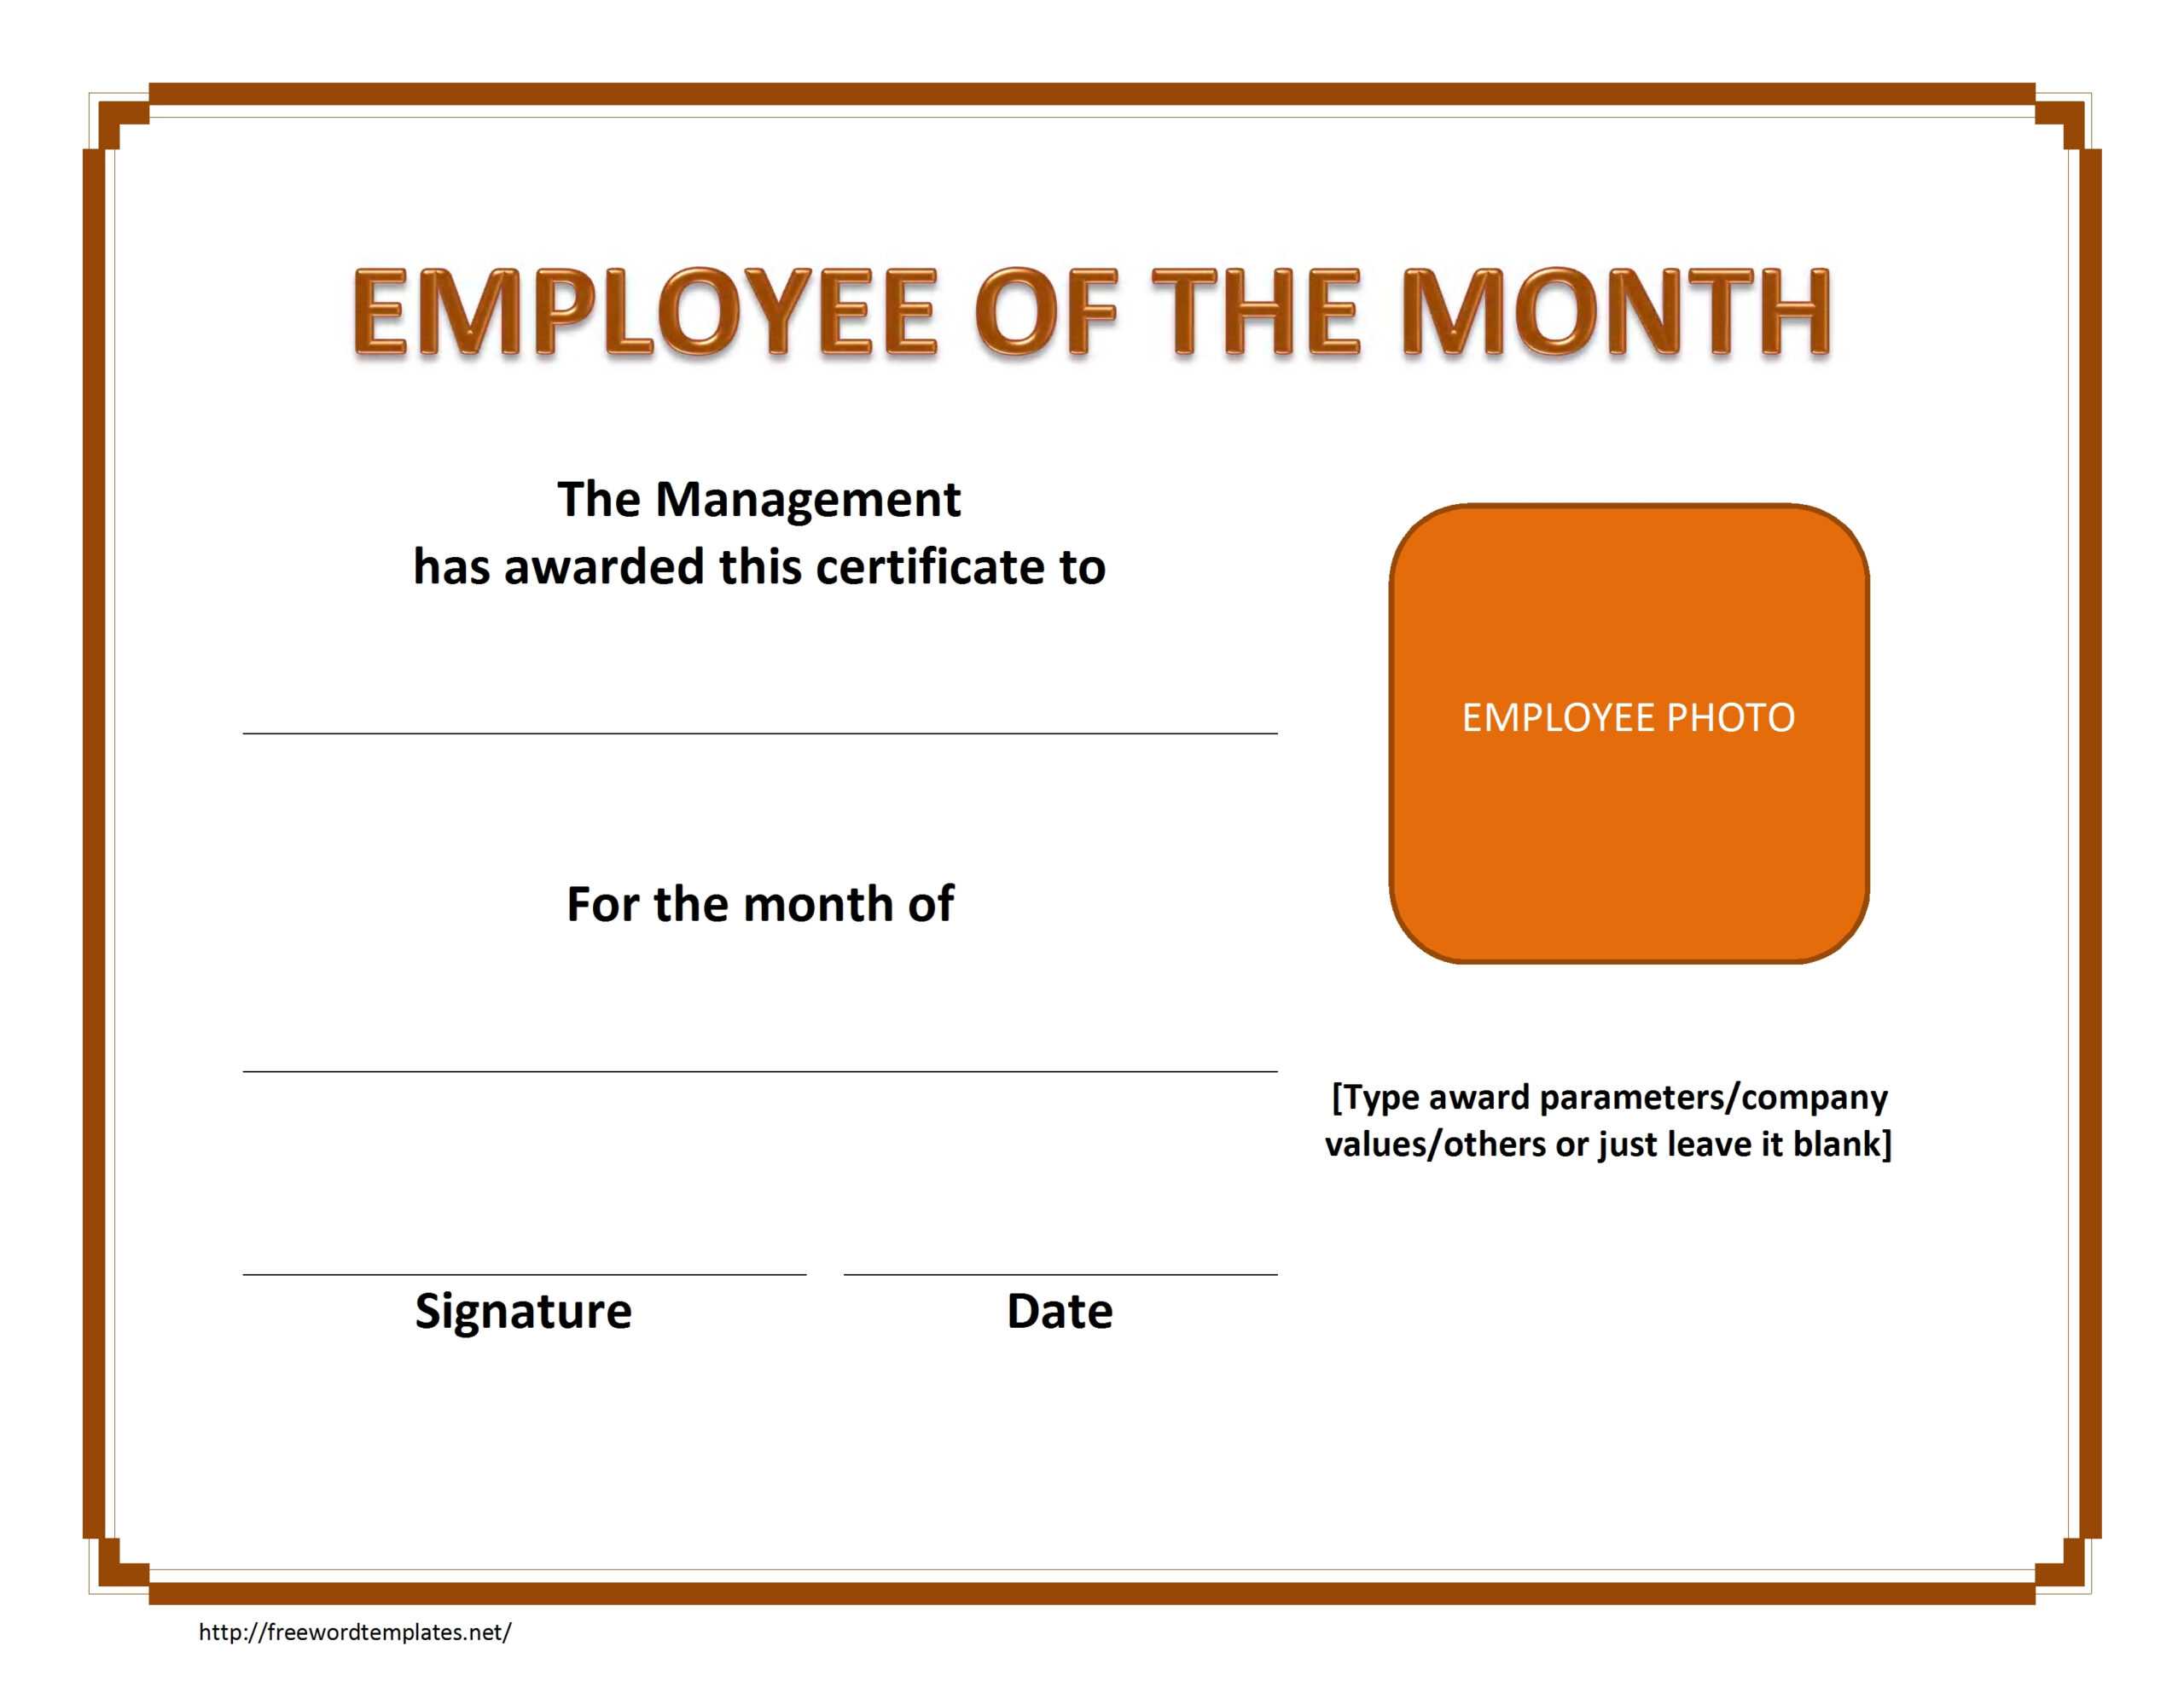 Employee Of The Month Template | E Commercewordpress Regarding Employee Of The Month Certificate Template With Picture